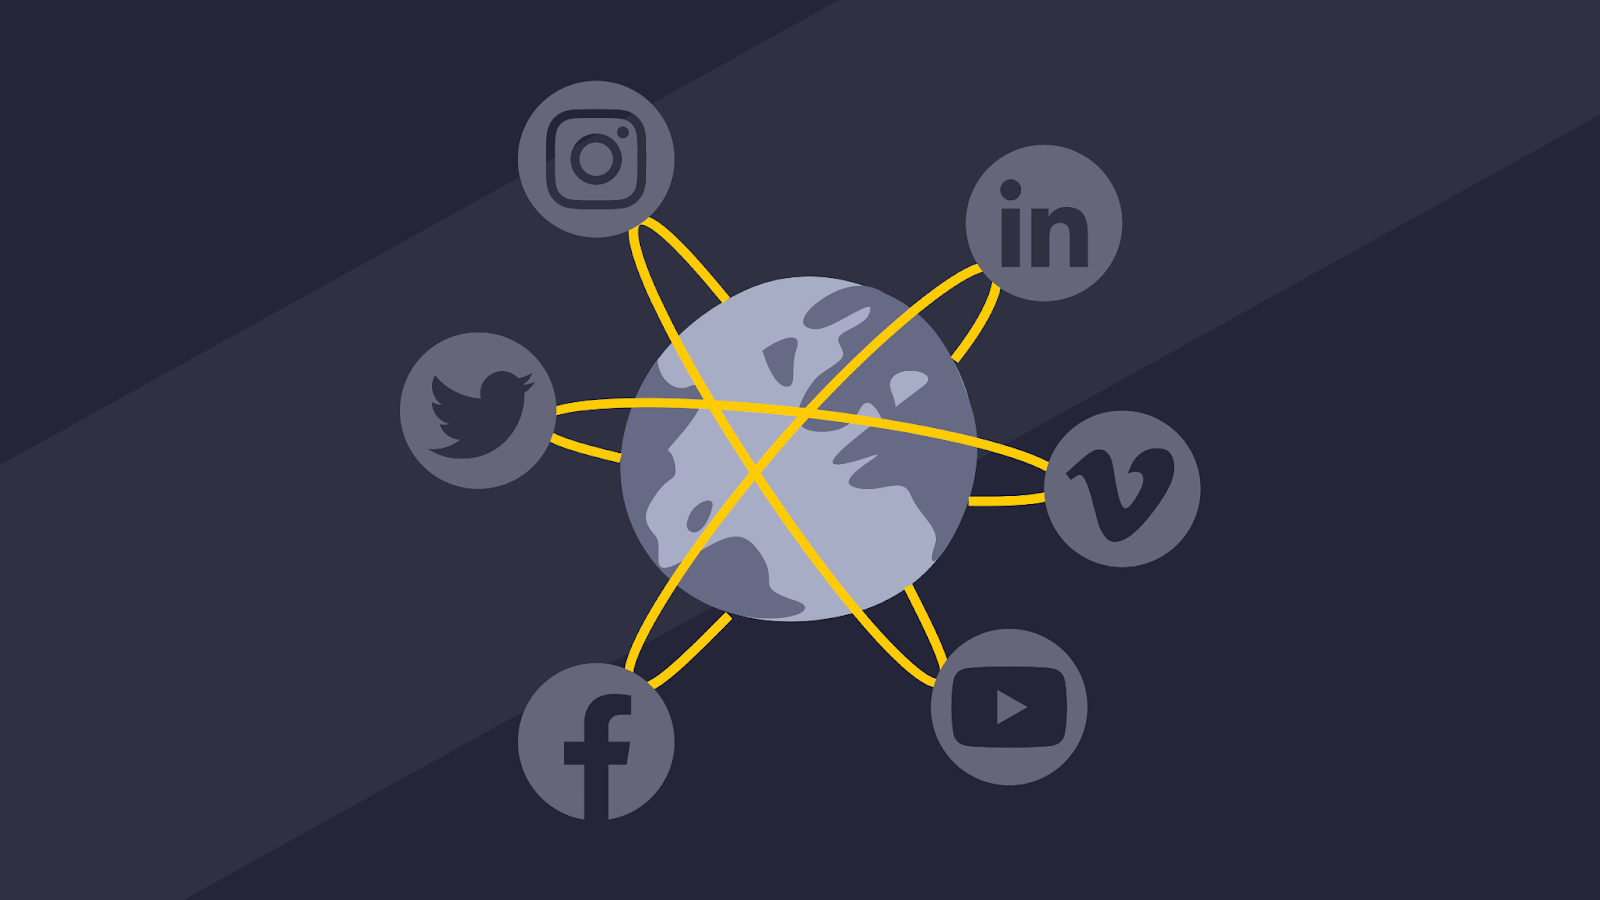 The world surrounded by social media logos linked to each other with yellow lines